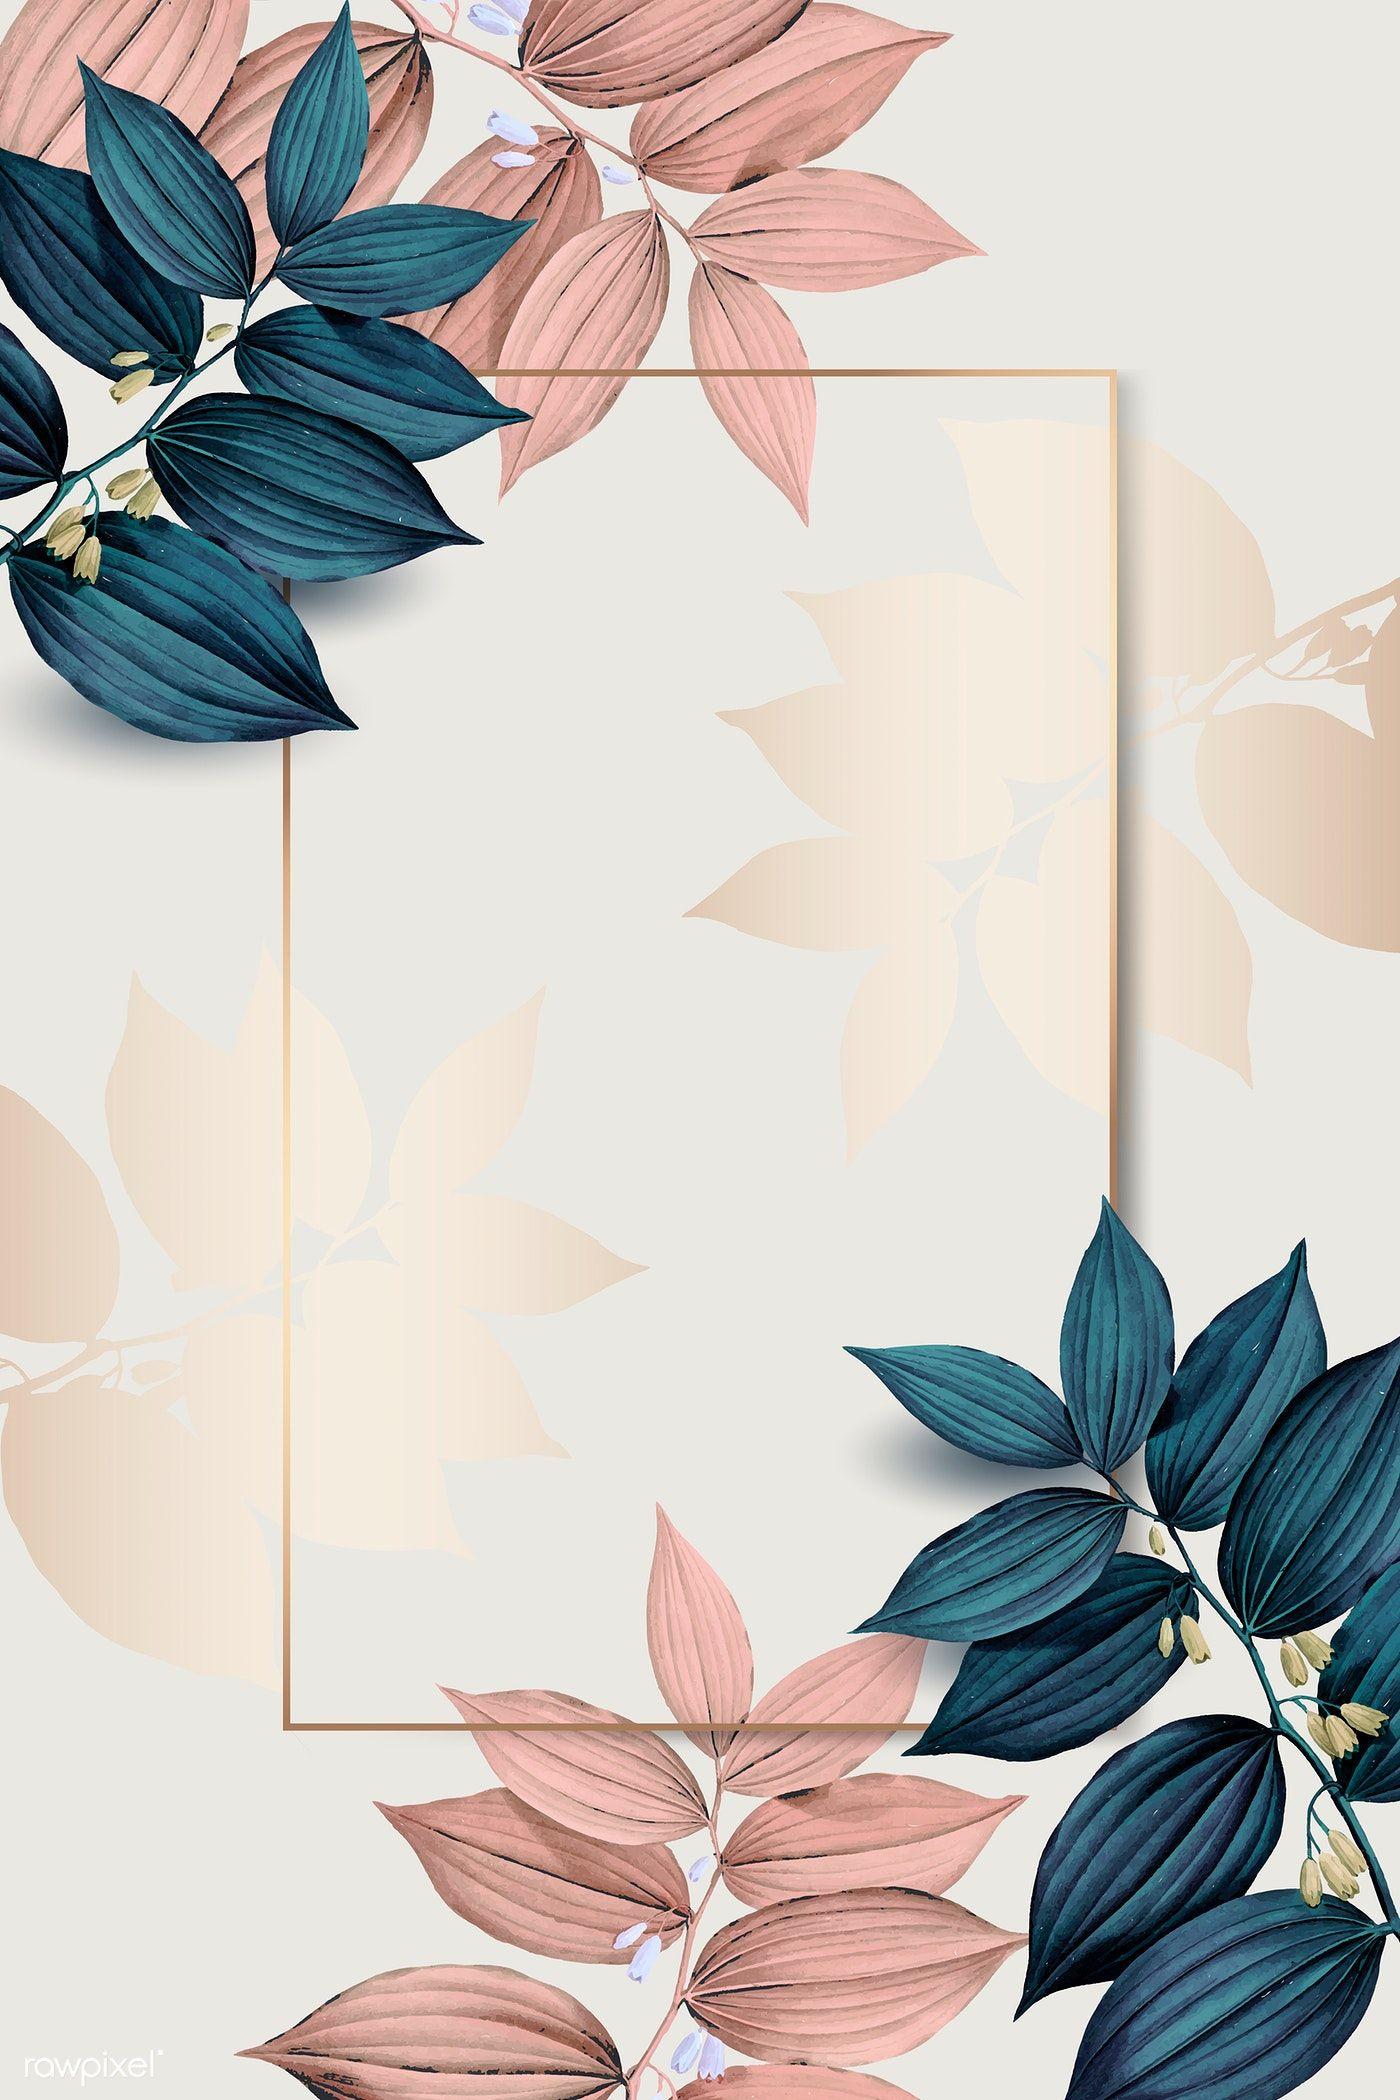 Download premium vector of Rectangle gold frame on pink